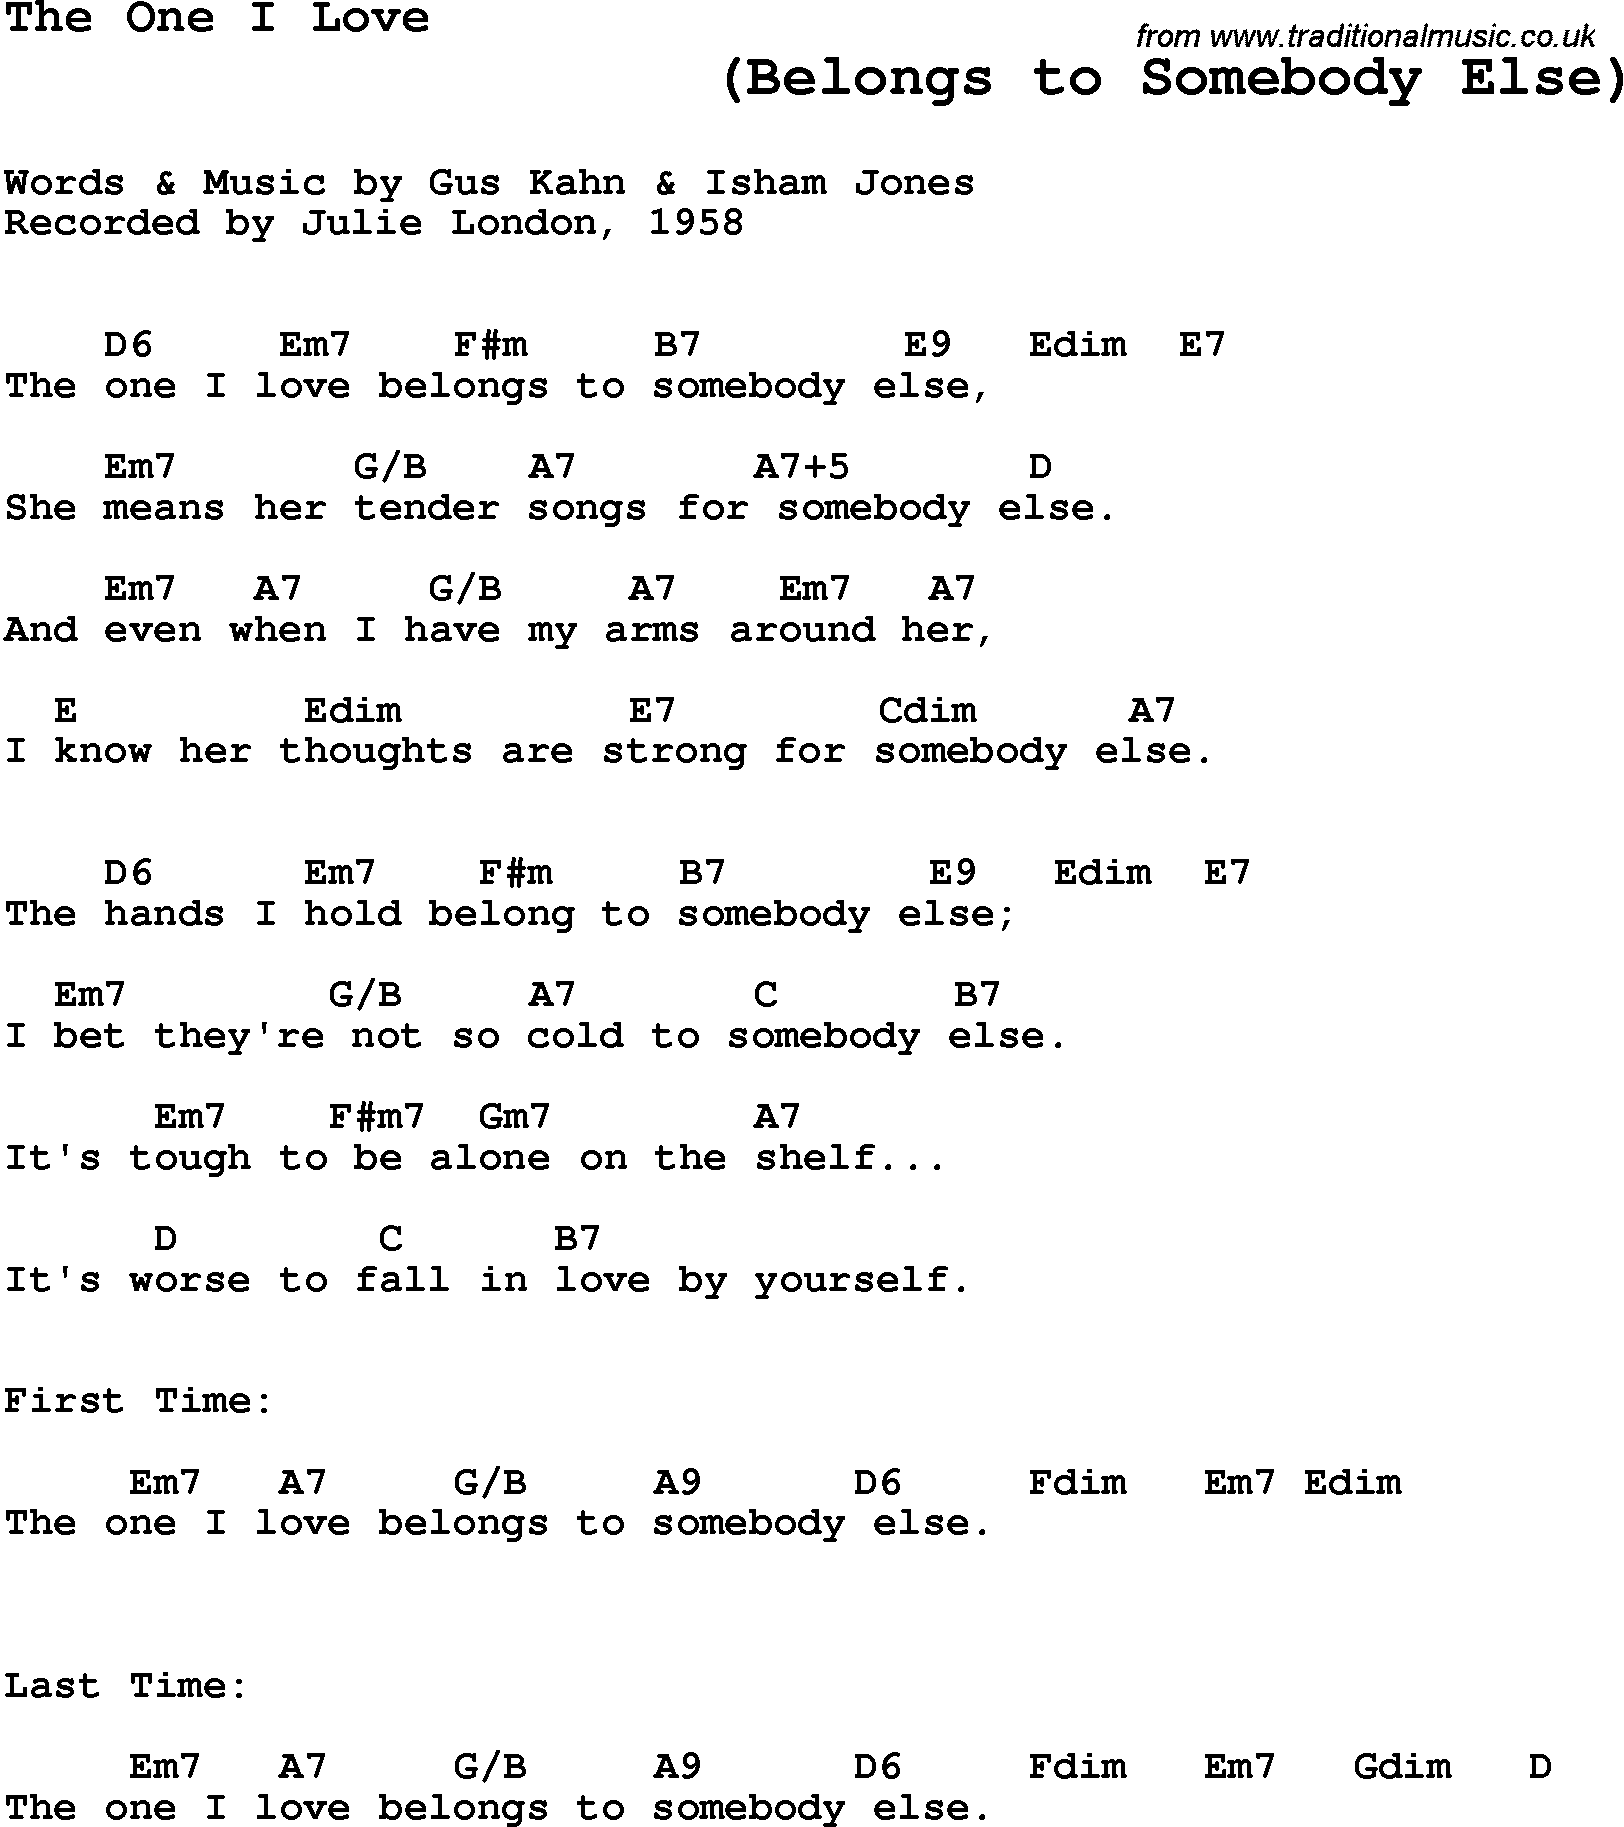 Song Lyrics with guitar chords for One I Love, The - Julie London, 1958